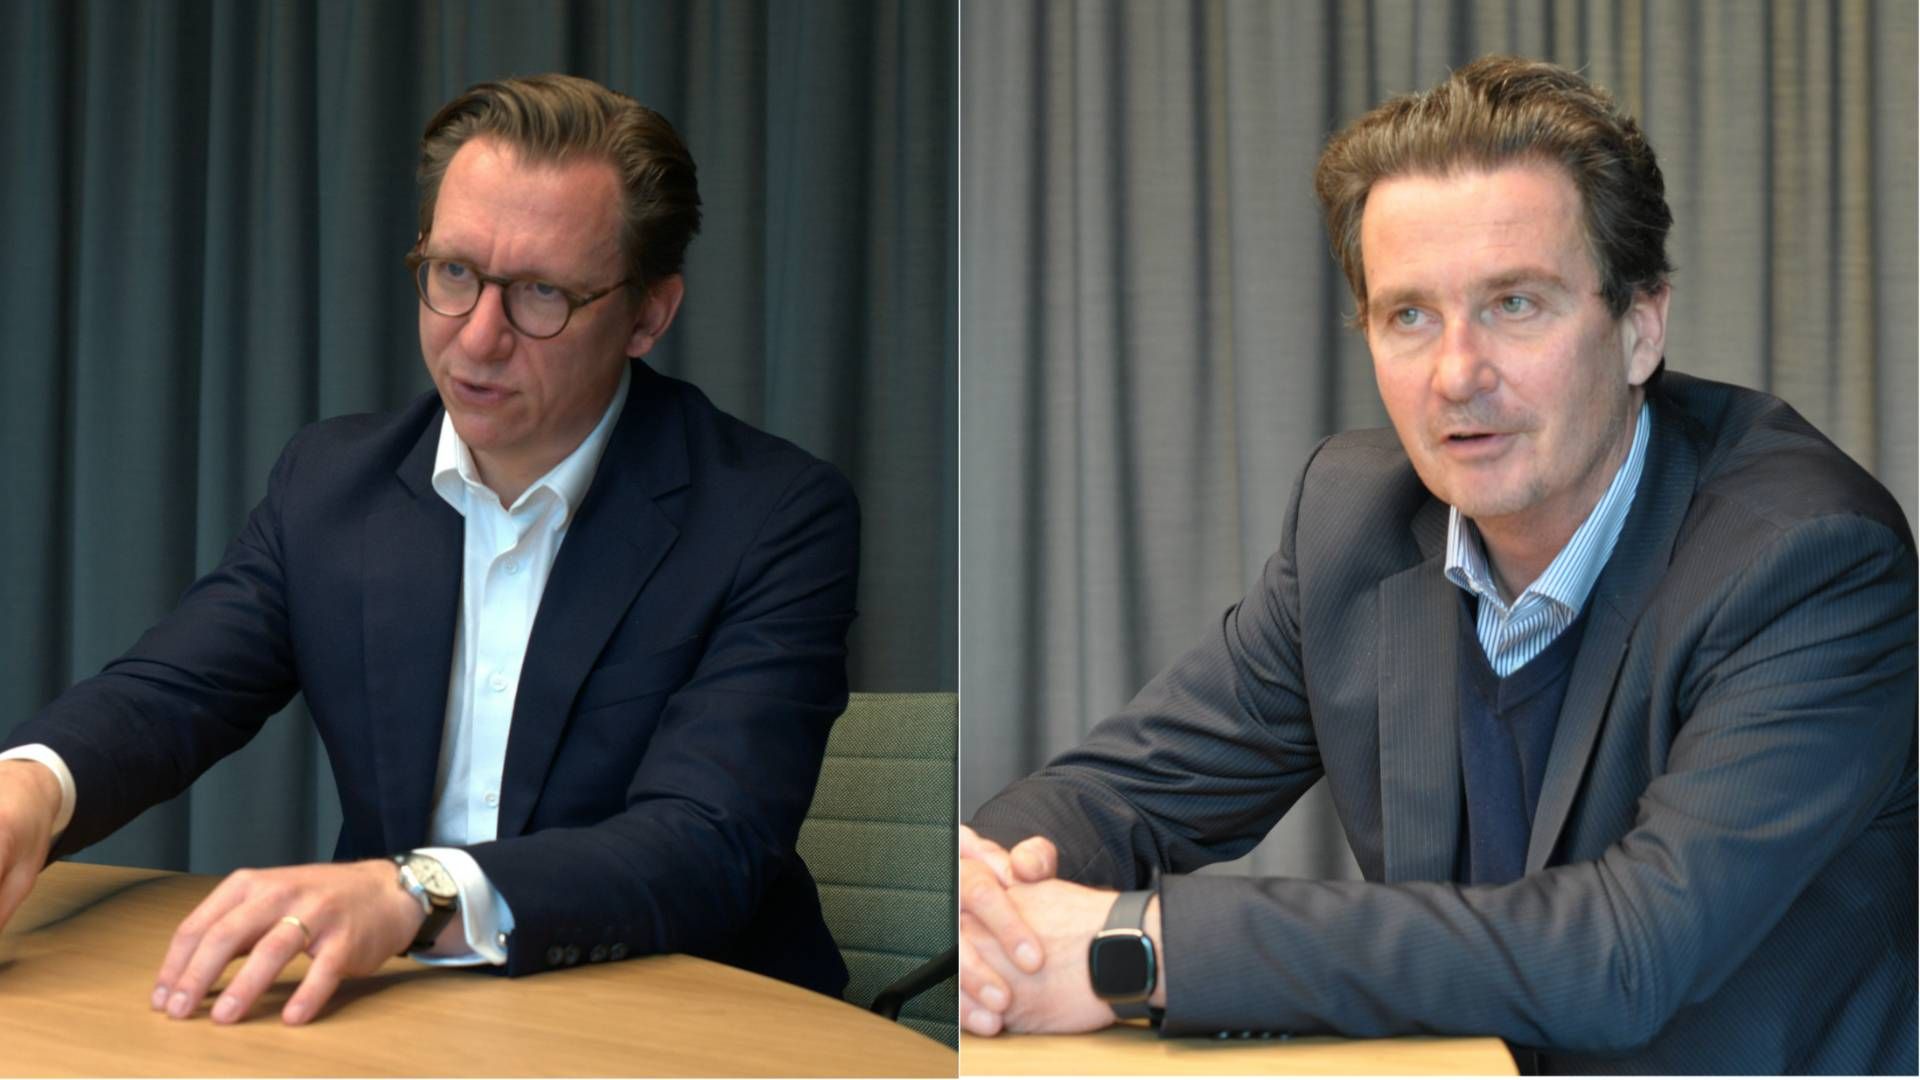 Marco van Daele, co-CEO & chief investment officer and Marius Dorfmeister, co-CEO of Susi Partners | Photo: PR / Susi Partners